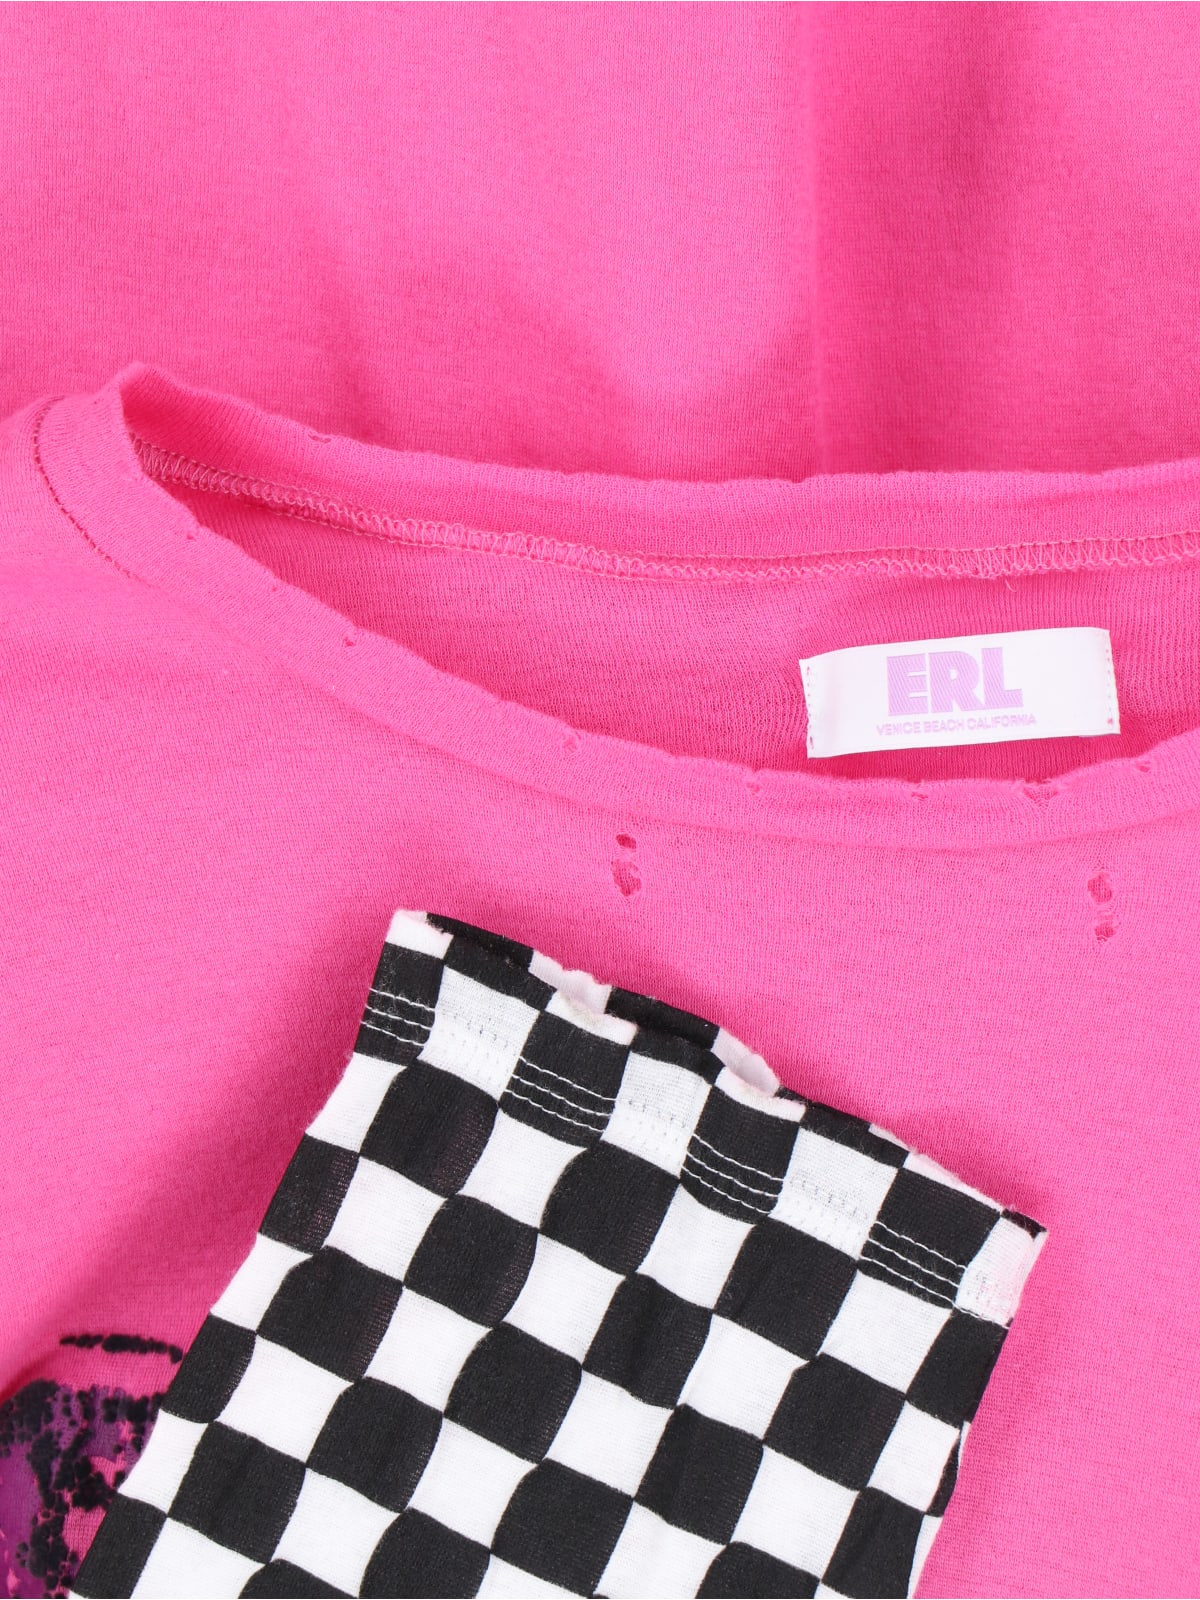 Shop Erl Long-sleeved T-shirt In Pink